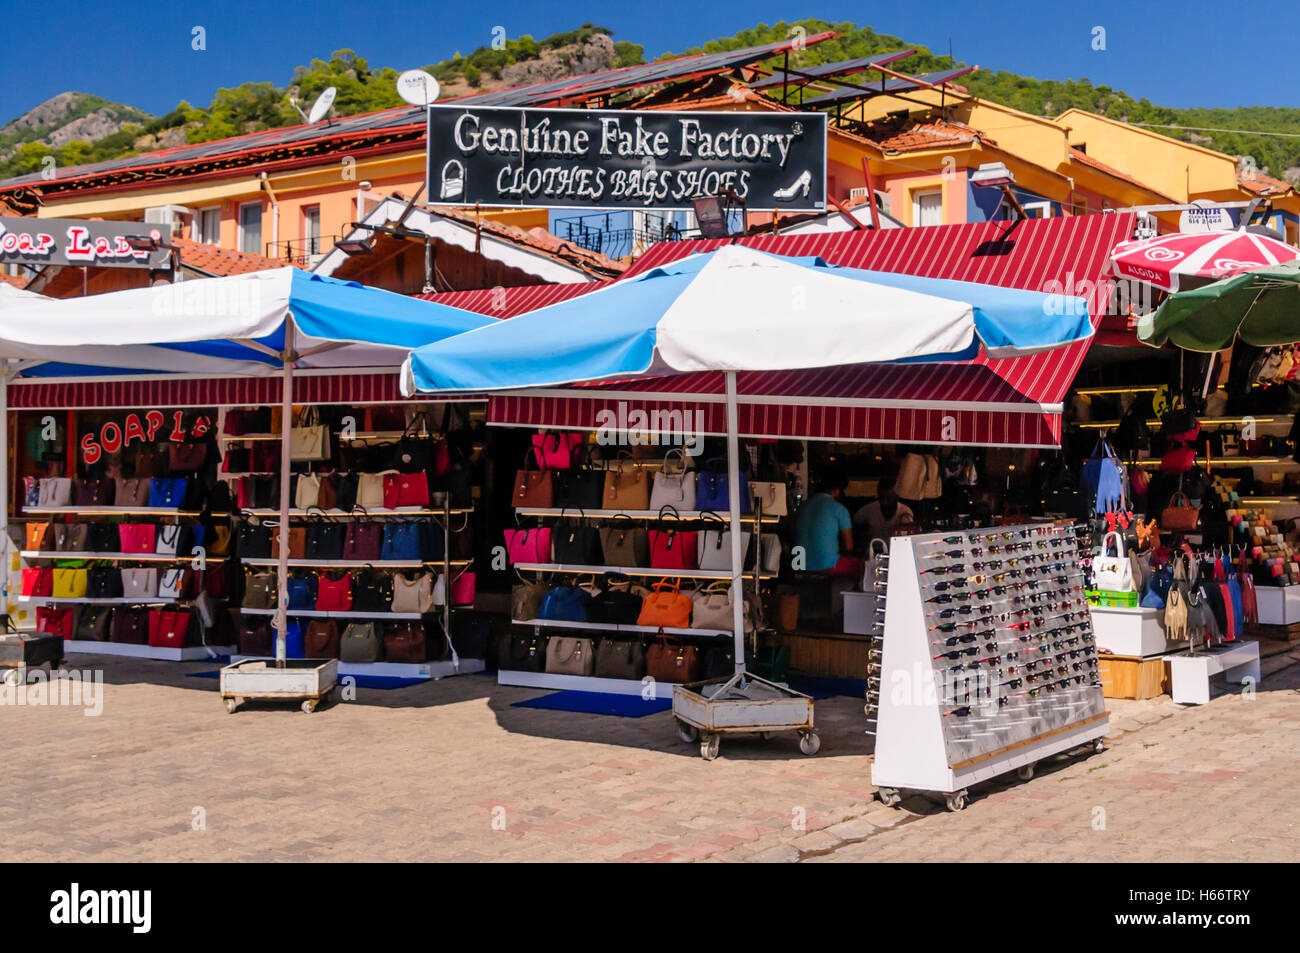 Sign in a Turkish town called 'Genuine Fake Factory' selling counterfeit clothese, bags and shoes. Stock Photo